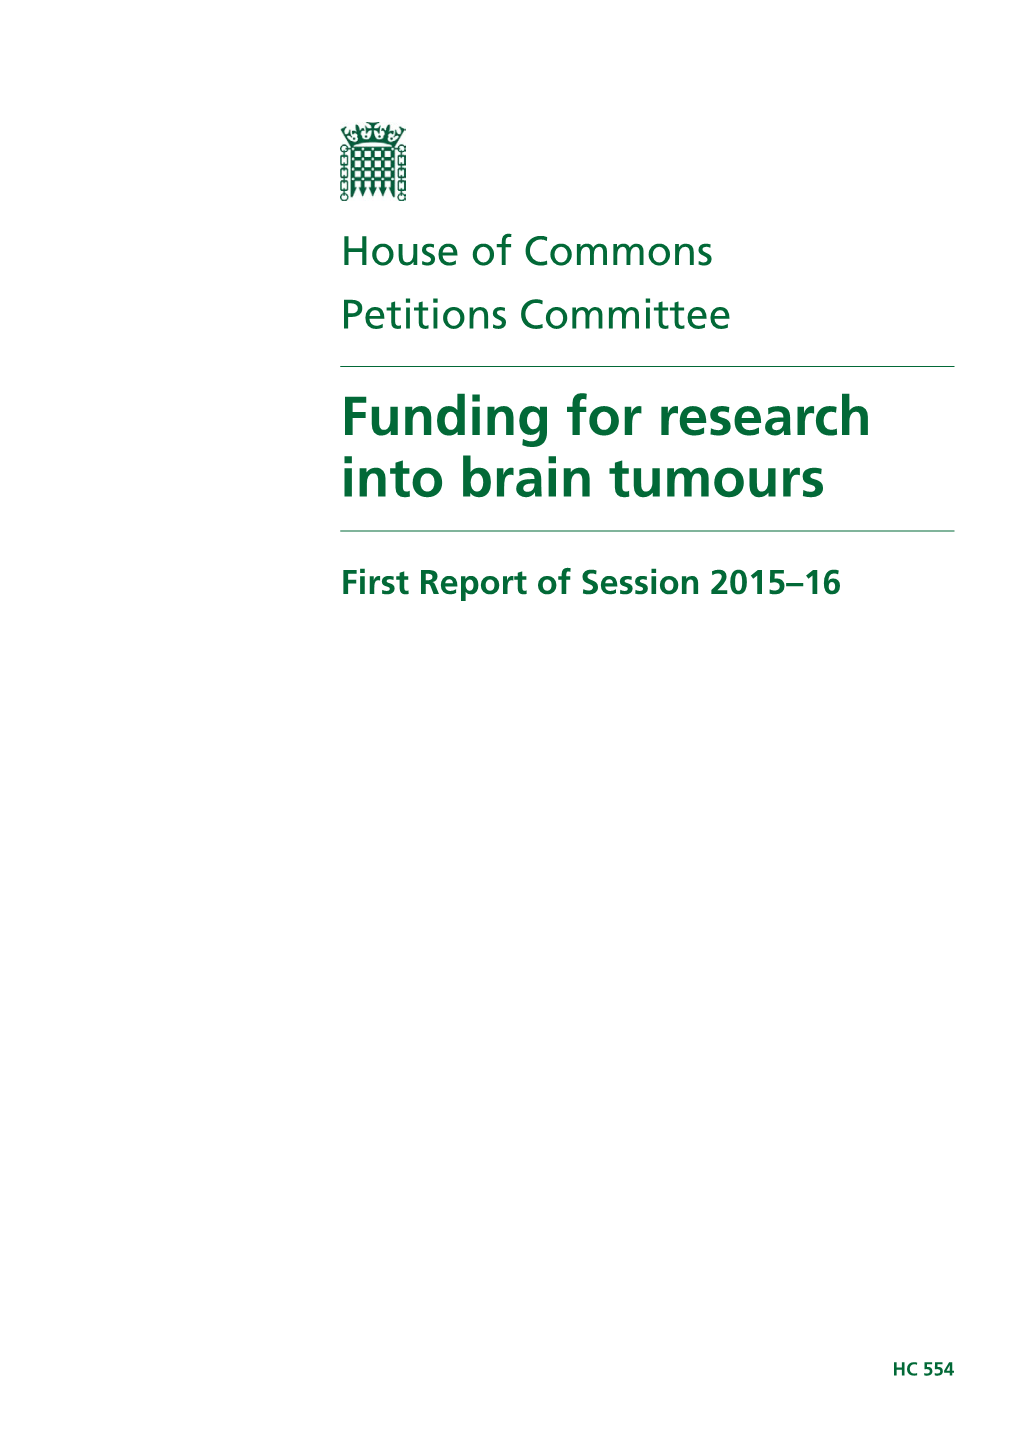 Funding for Research Into Brain Tumours